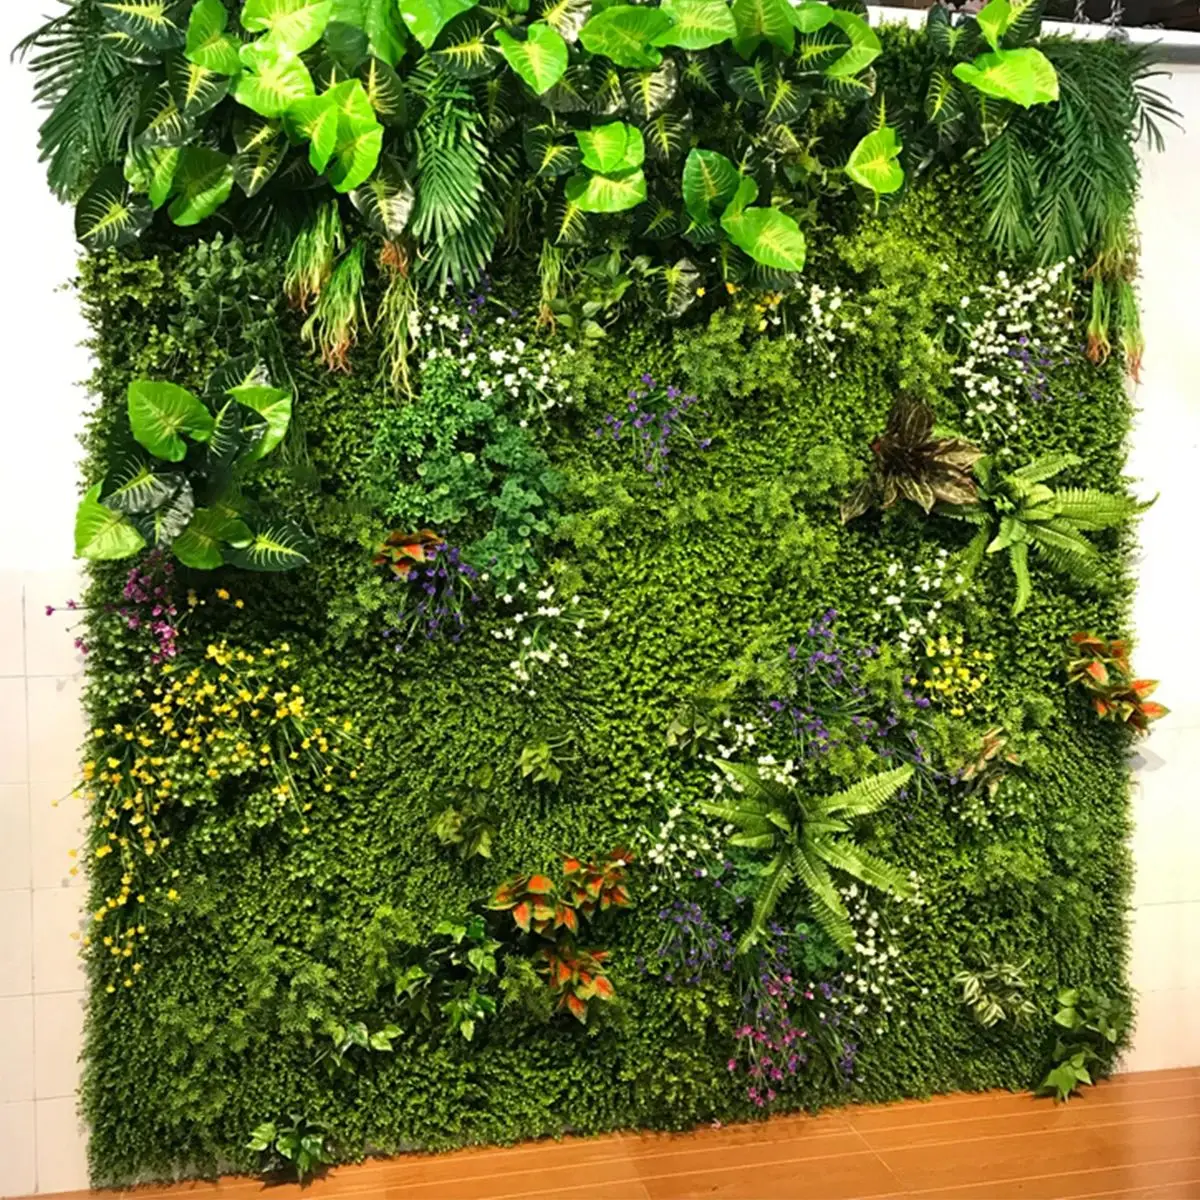 Artificial Plant Wall Reusable Grass Backdrop Wall Panel Plastic Green Plant Hanging Fencing Decor UV Protection For Home Garden